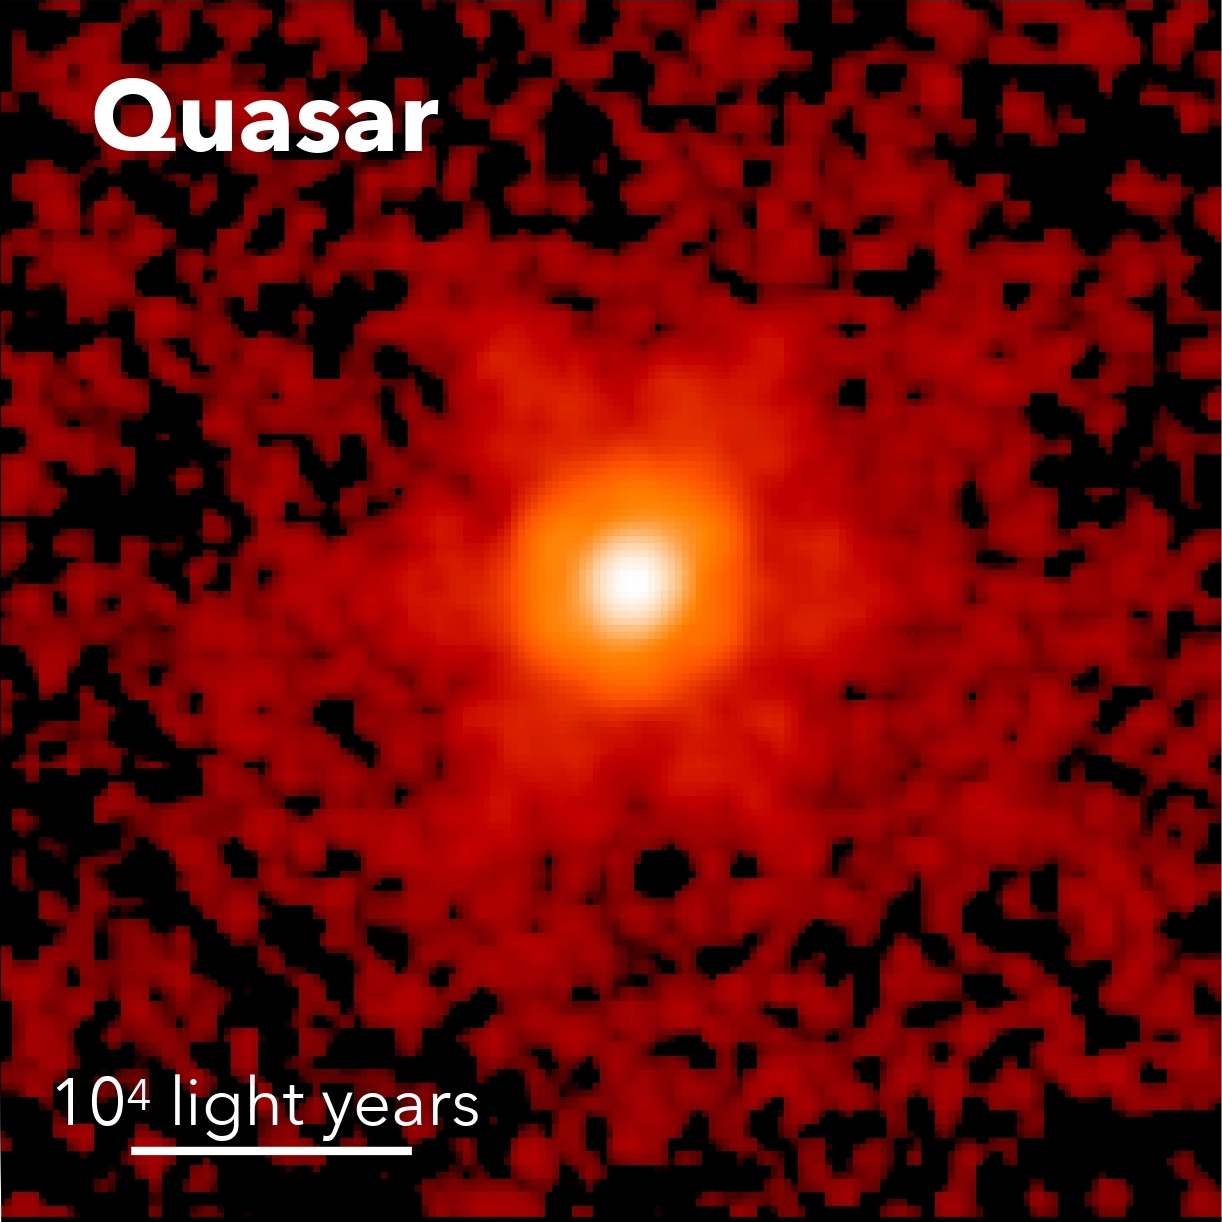 an infrared image of the quasar hsc j2236+0032 captured by jwst. Credit: Ding, Onoue, Silverman, et al.